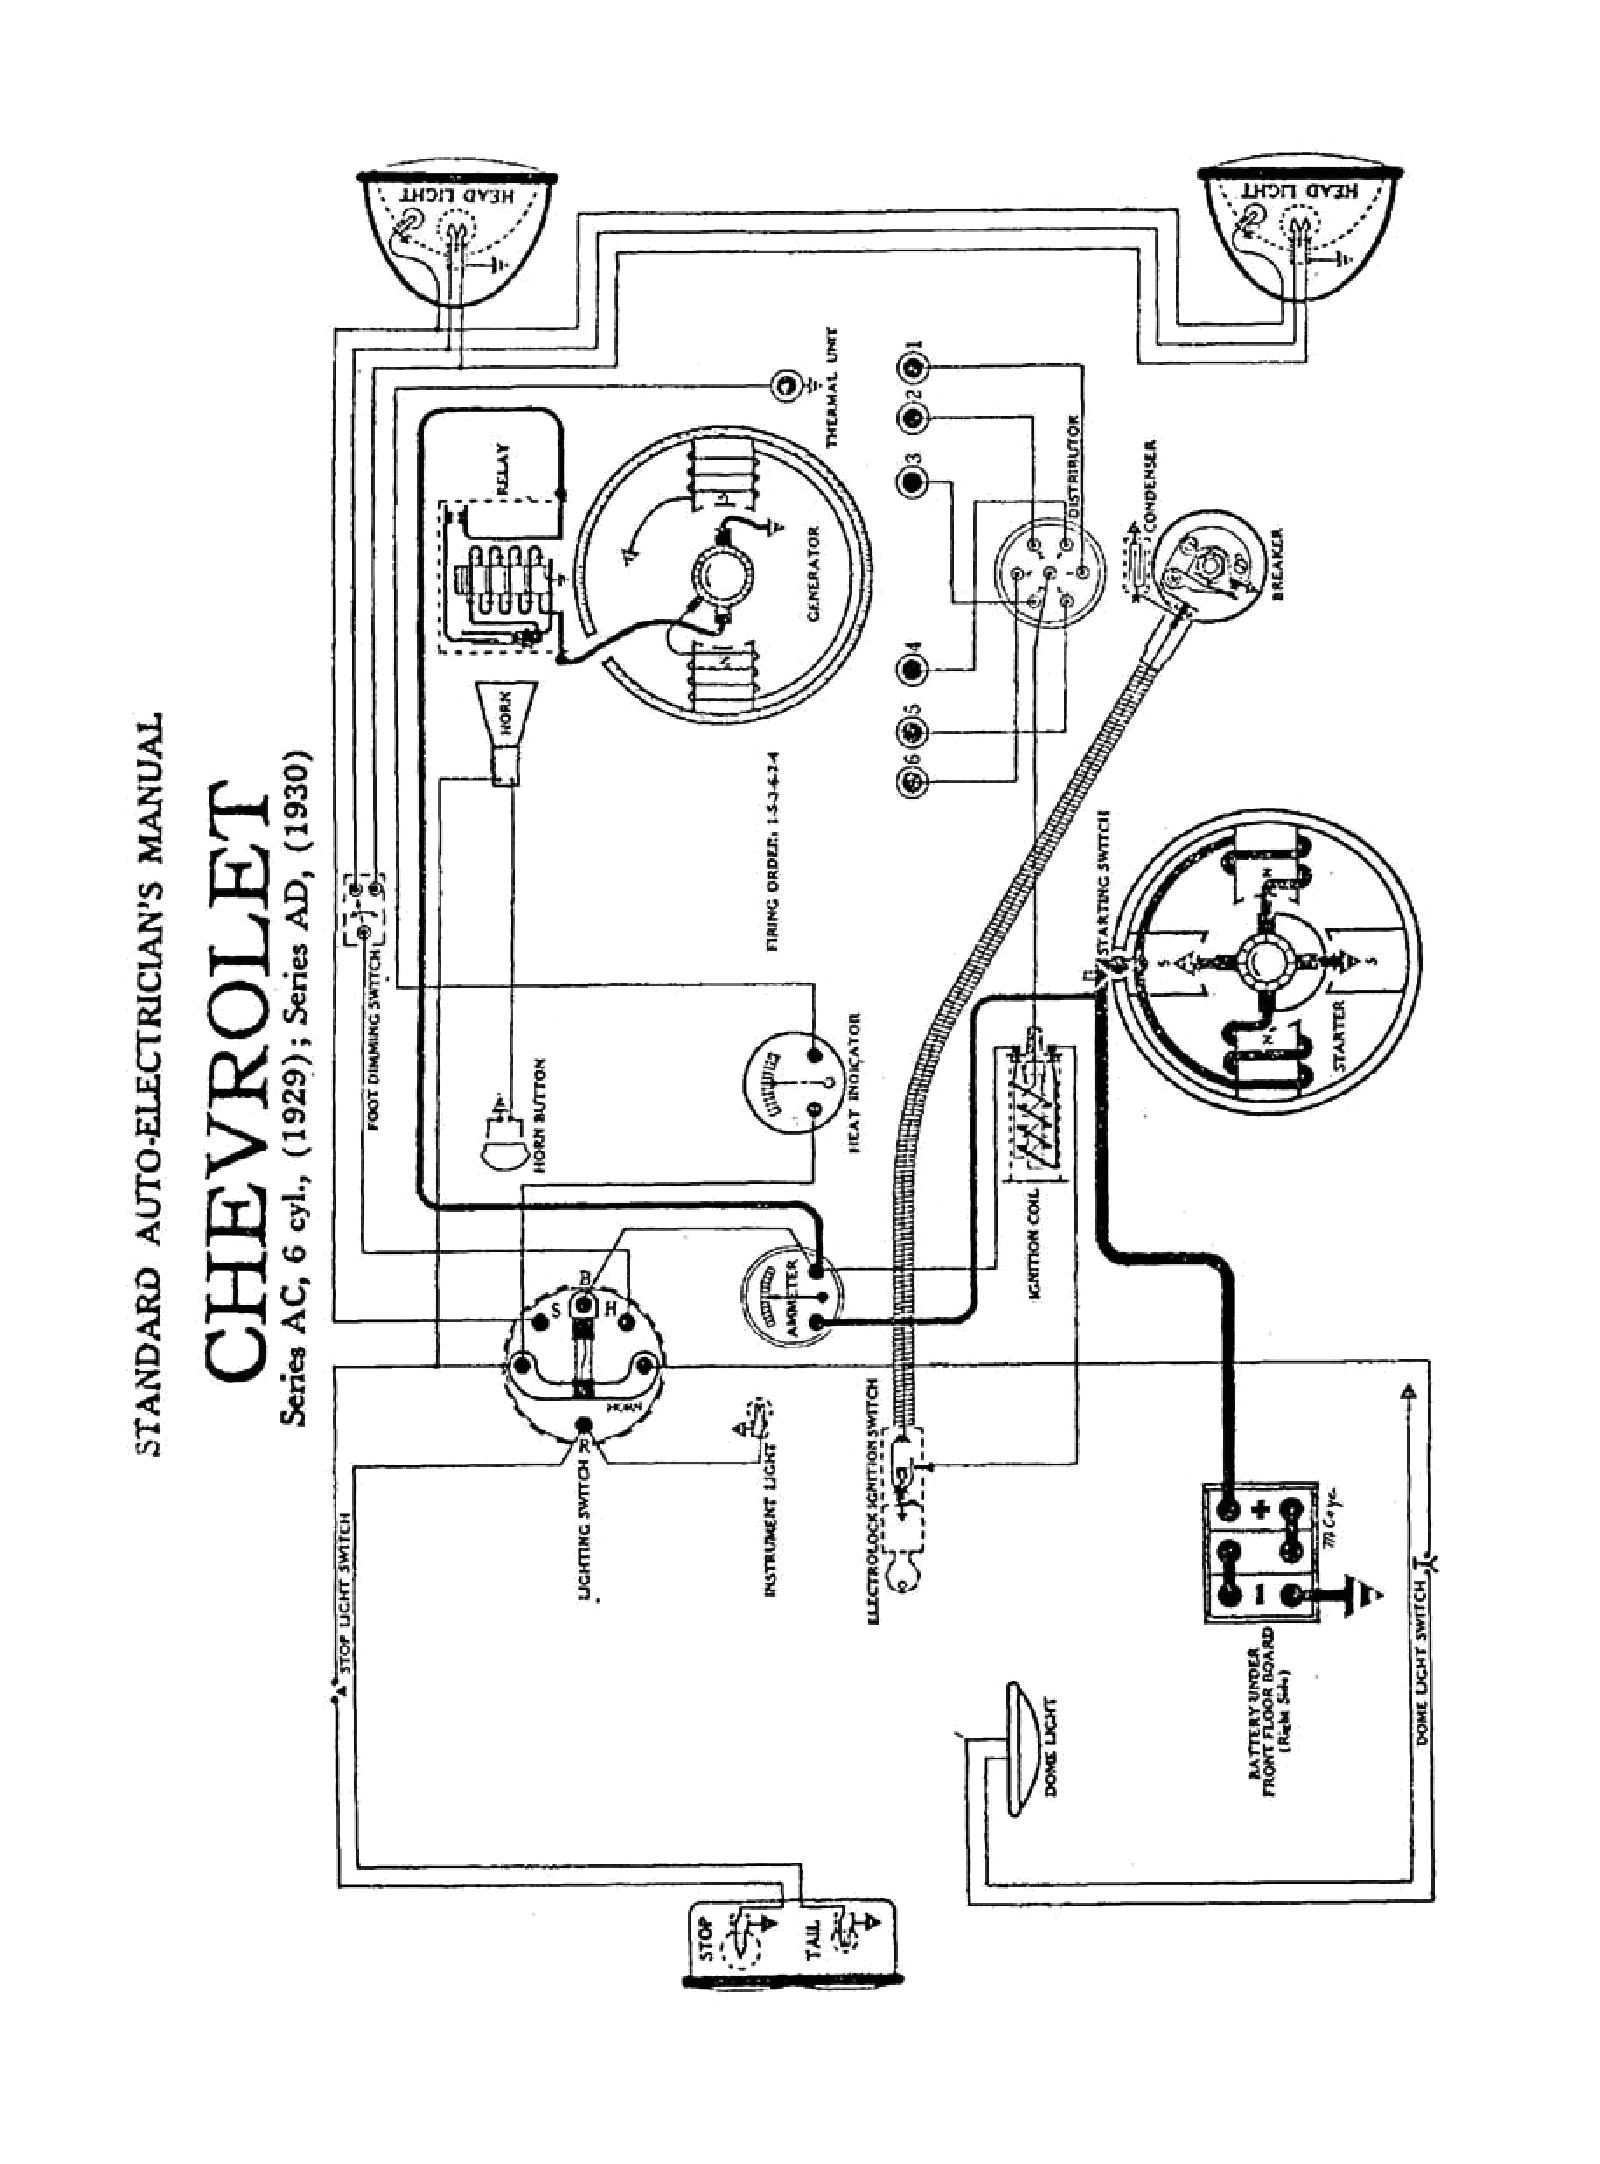 ford dome light wiring wiring diagram database ez dome light wiring harness diagram